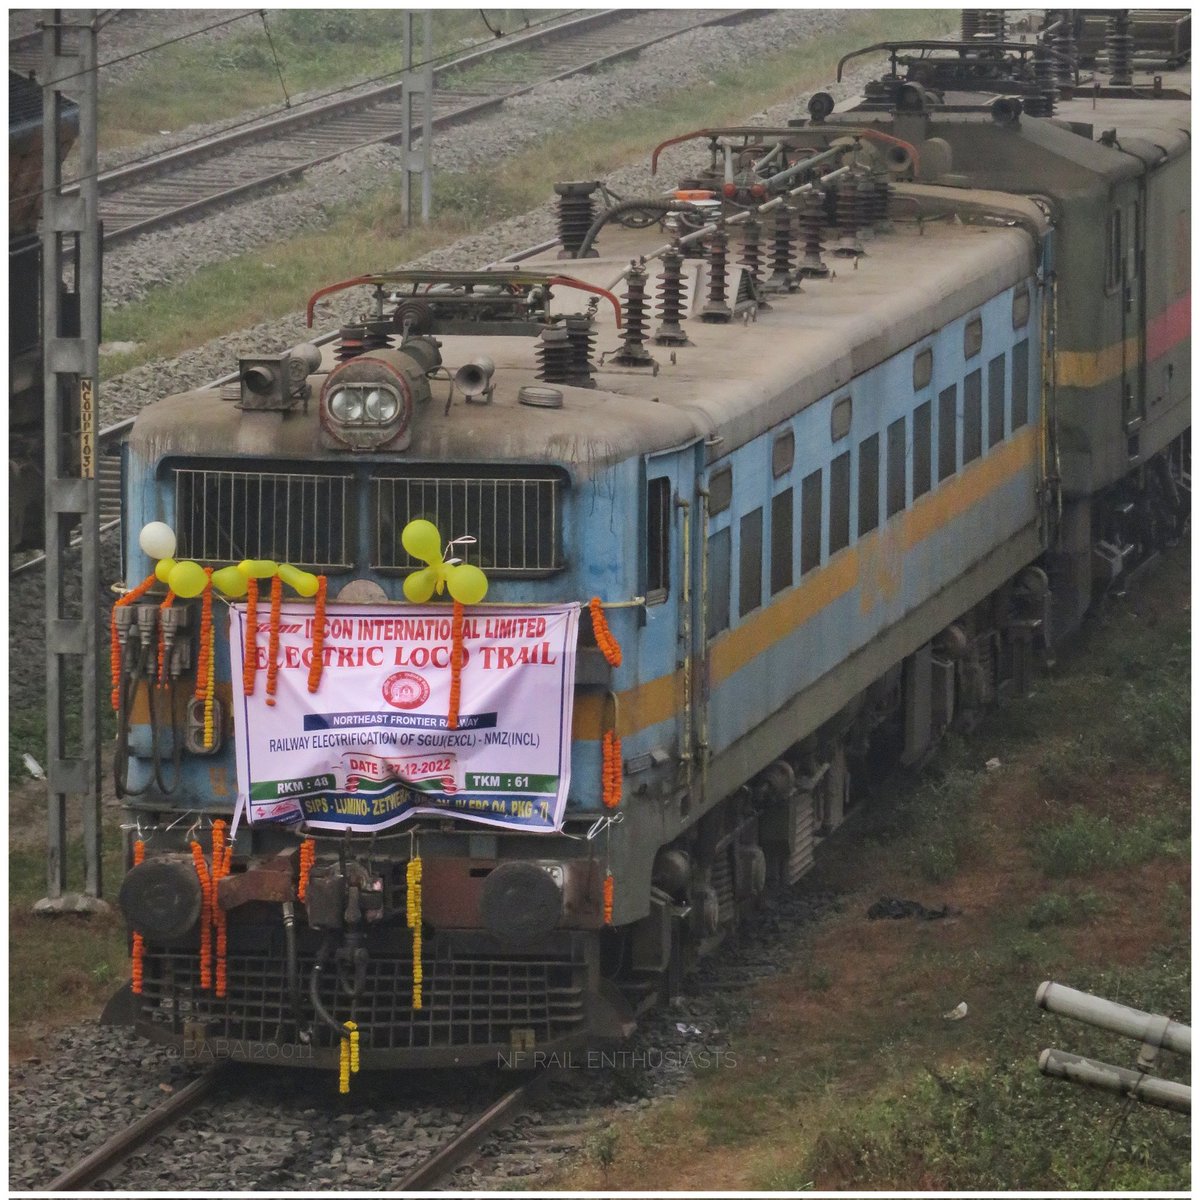 #Electrification Completed & Light Electric Loco Trial Done !!

Gonda WAG7 #27421 which did the Light Electric Loco Trial between #SiliguriJunction - #NewMalJunction, 
standing at #NewJalpaiguriJunction along with a WAG9 Locomotive

#NFRailEnthusiasts

@drm_kir @drm_apdj @RailNf